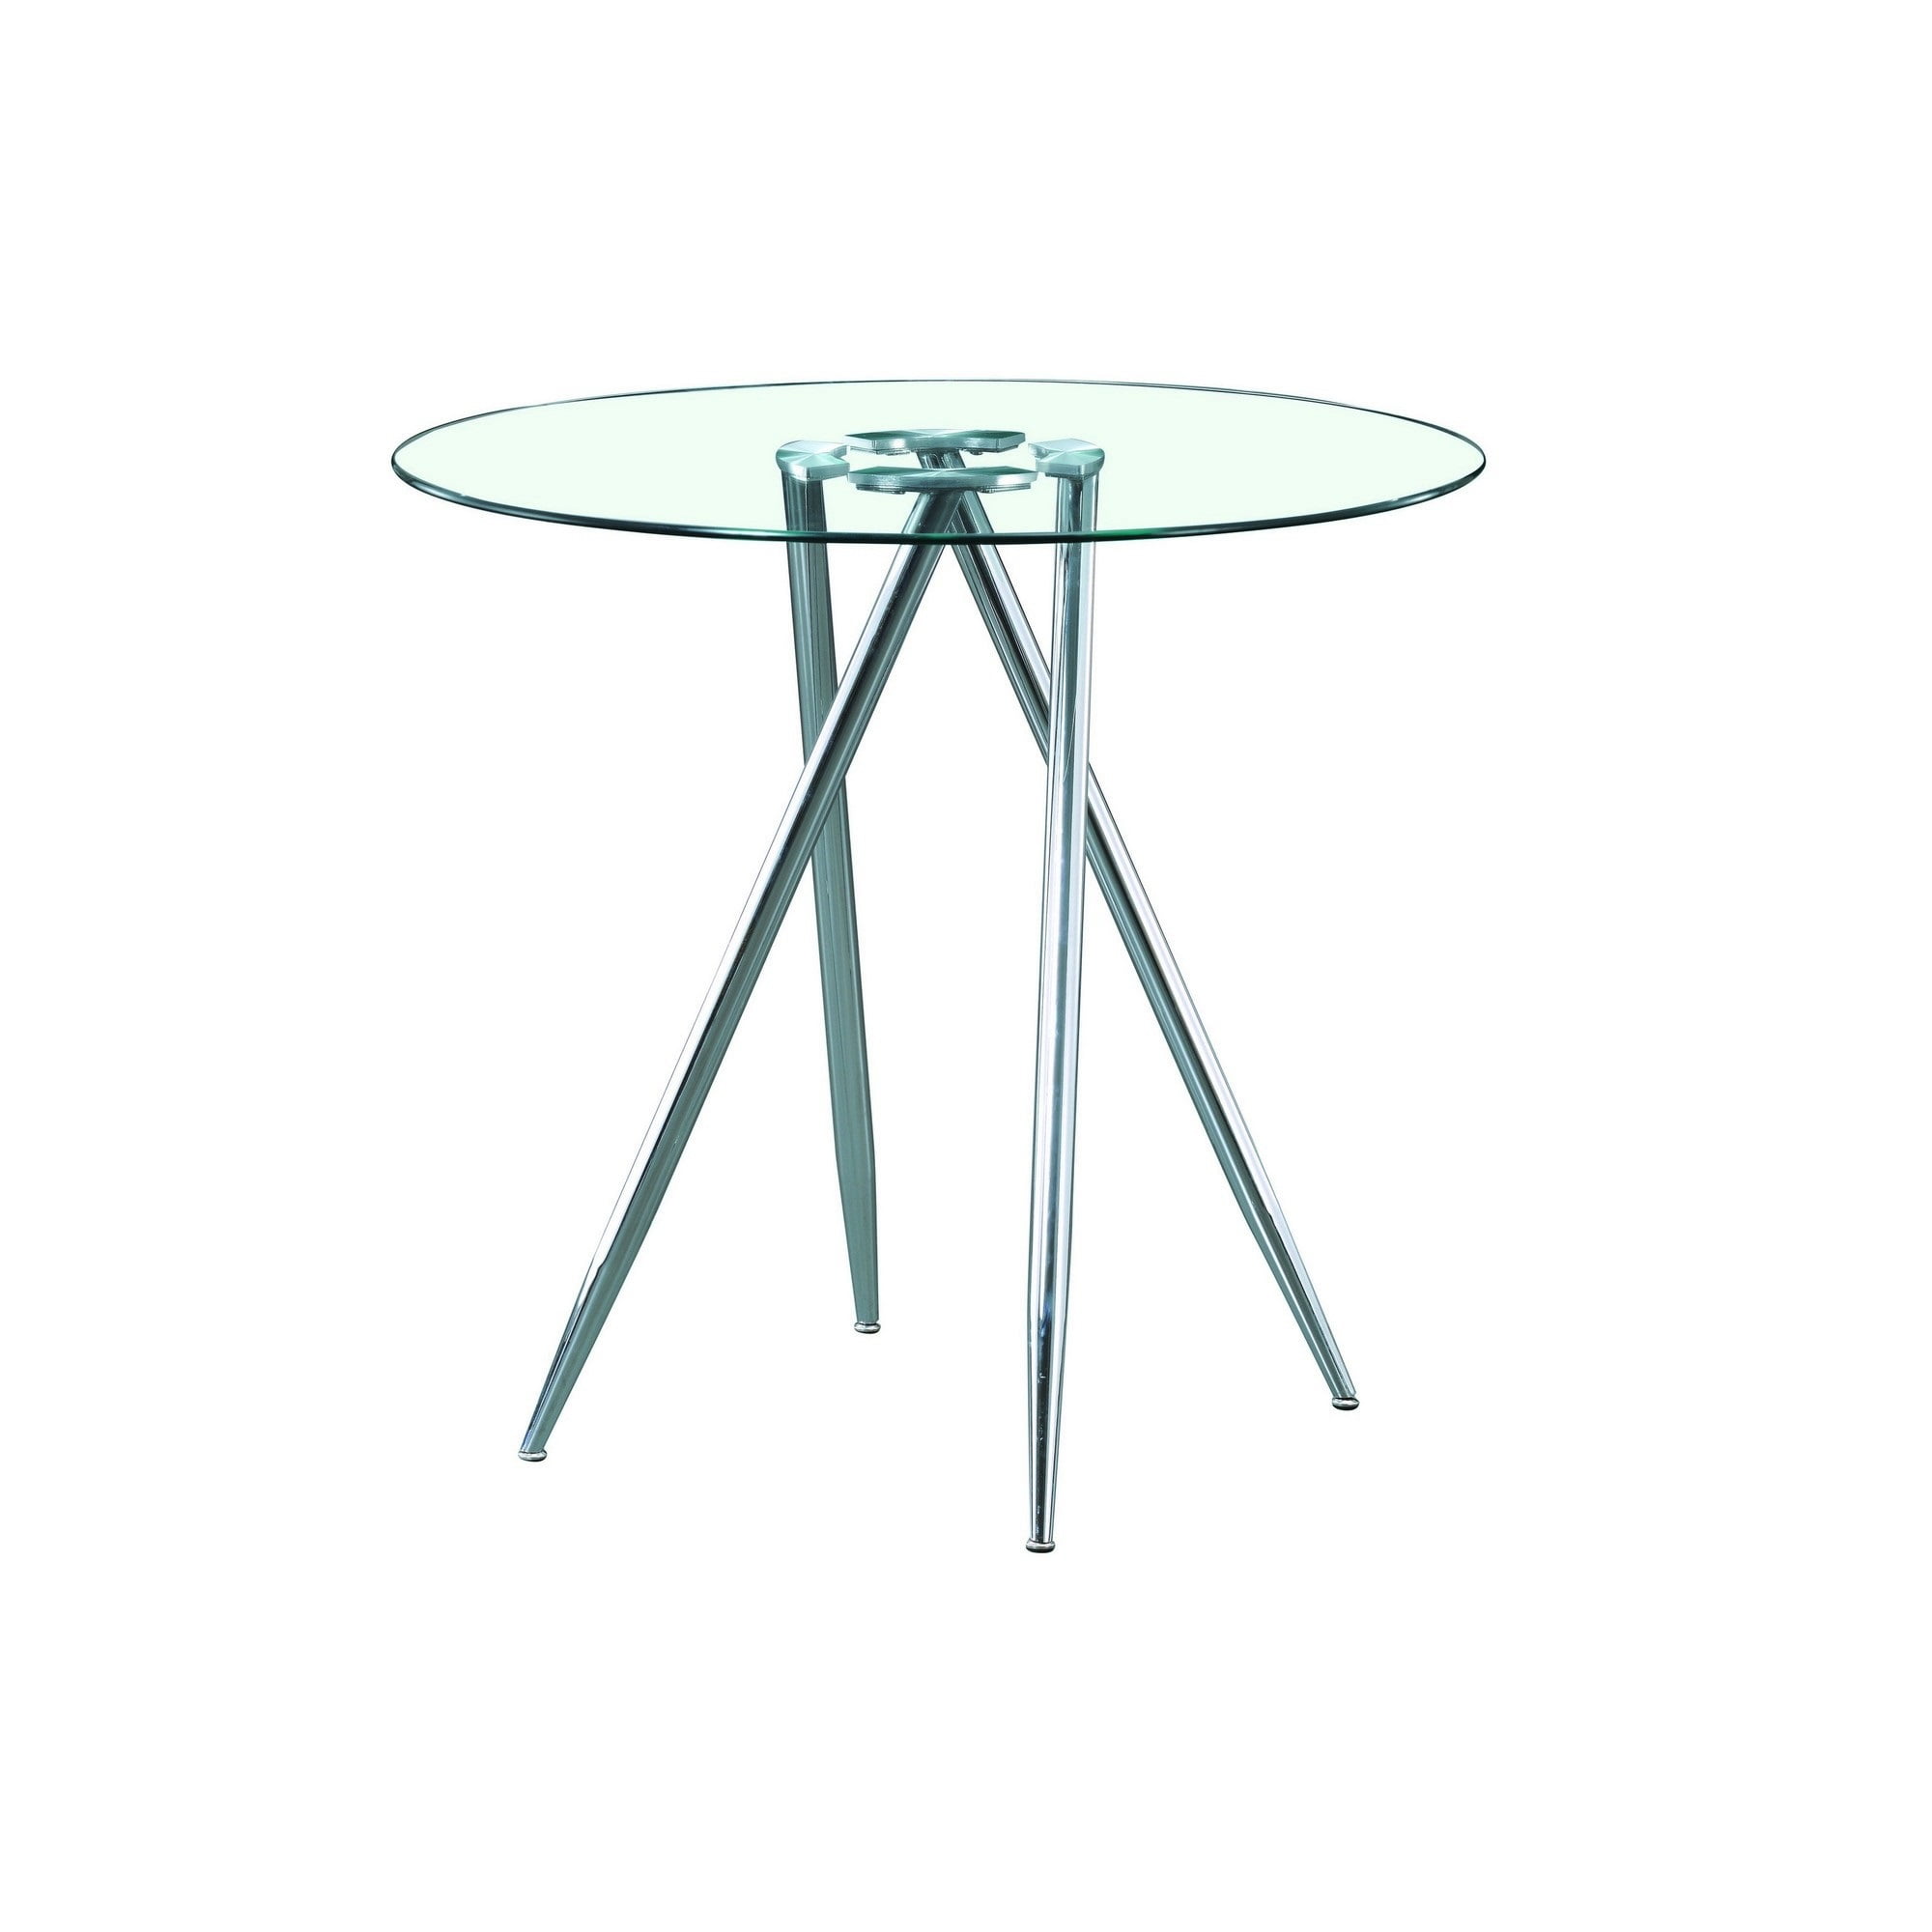 Round Clear Glass Dining Table 1m Tall Kitchen Dining Drinks Chrome Bar Stand 